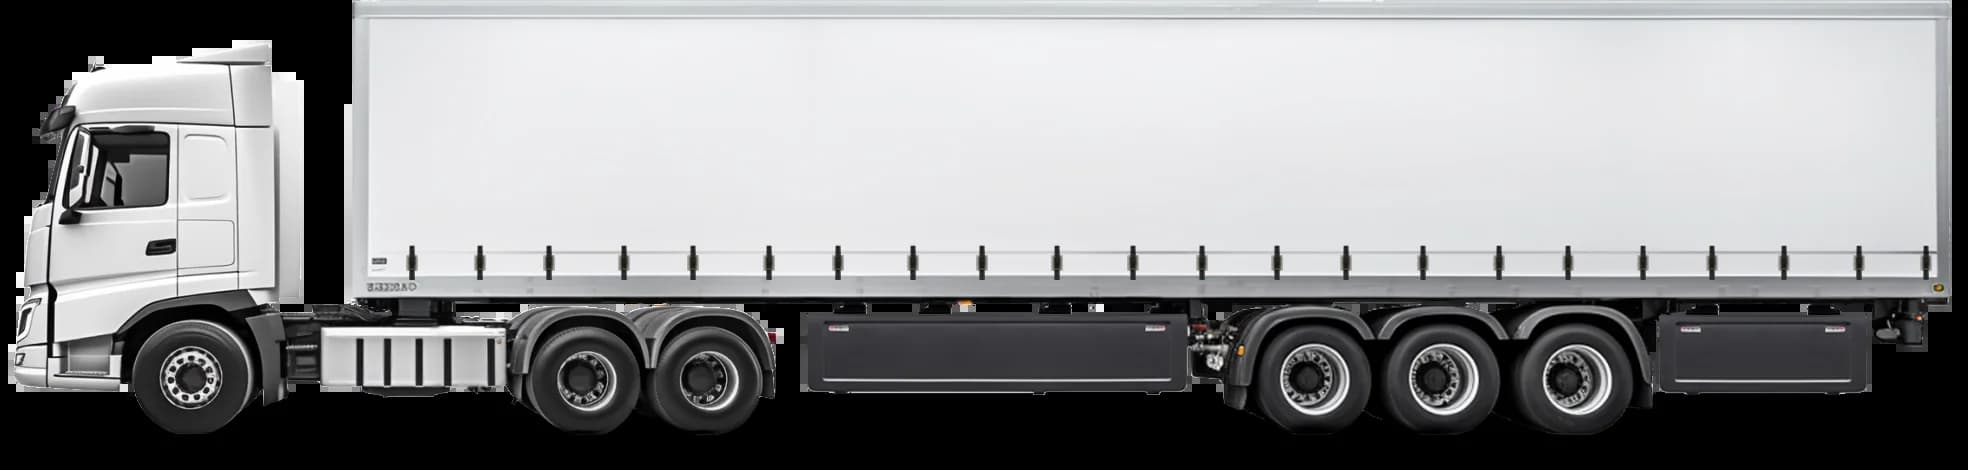 refrigerated van truck chilled load transport